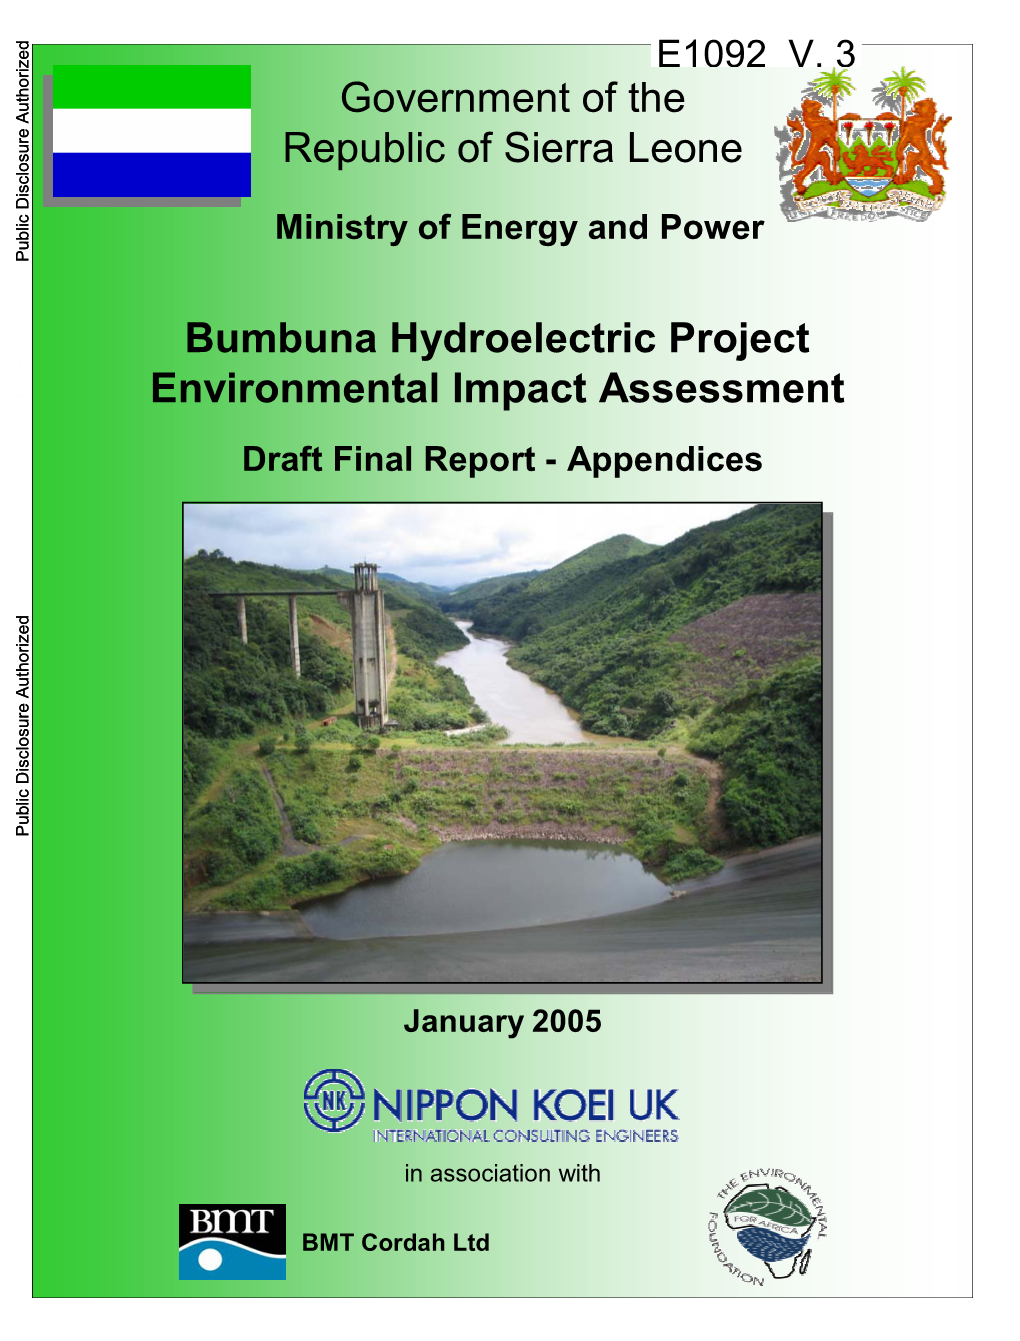 Retrospective Review of the Bumbuna Hydroelectric Project